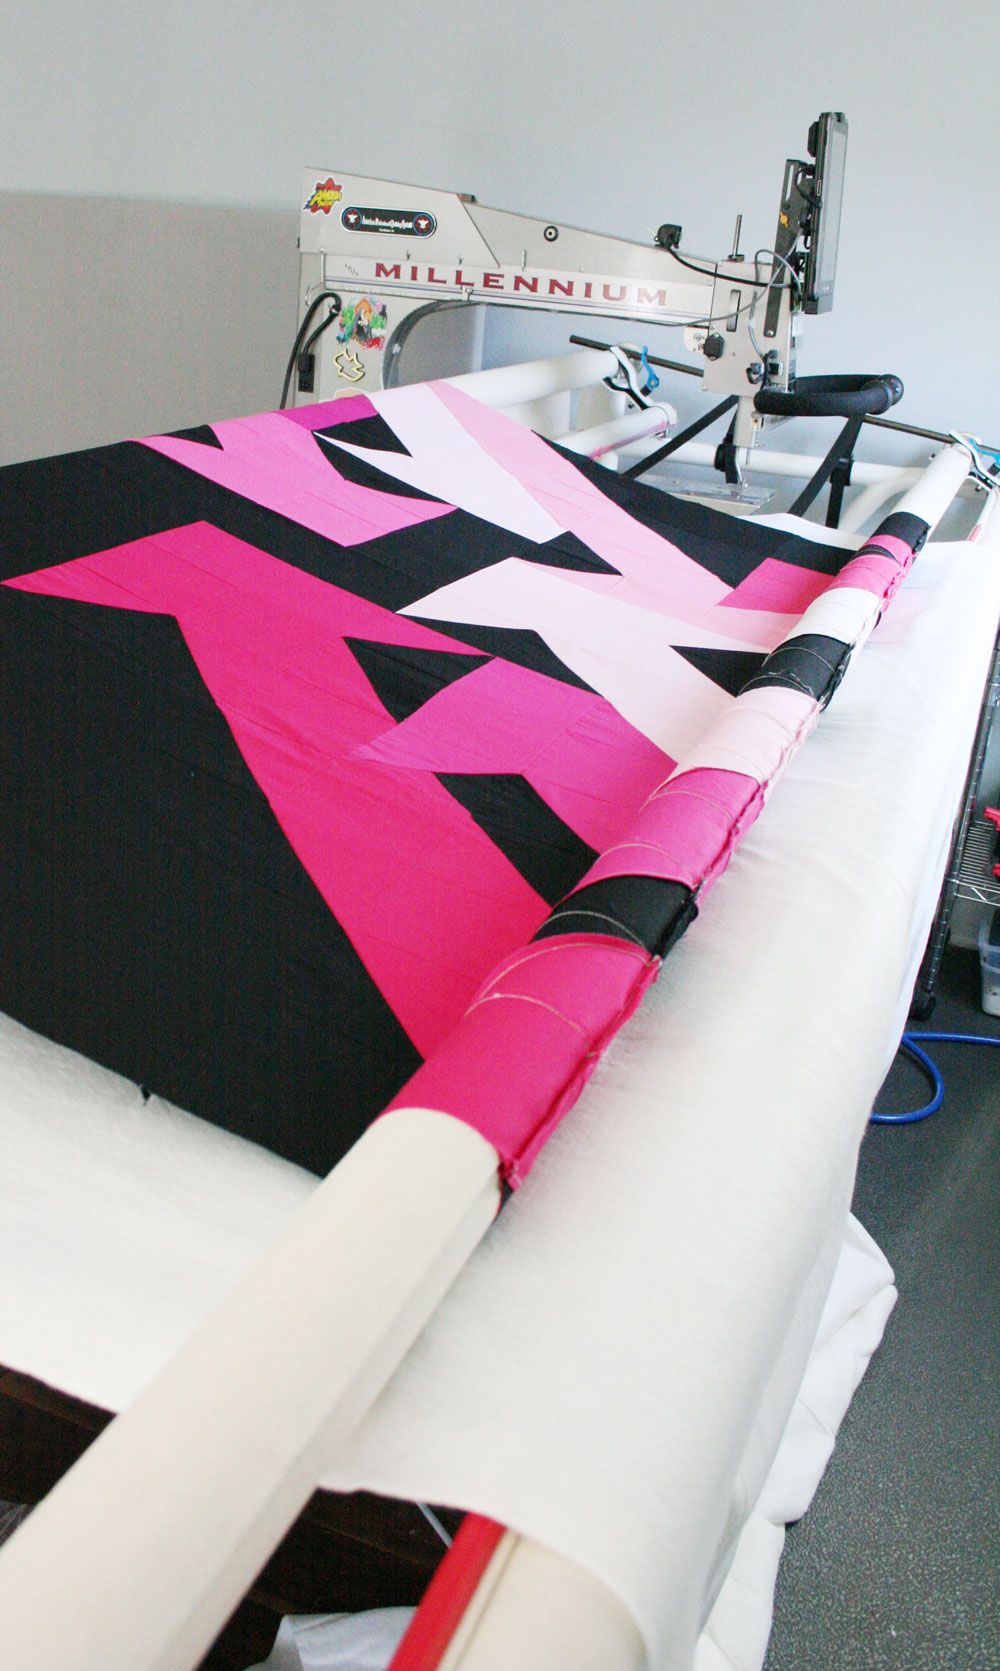 Do you have questions about hiring a longarm quilter? This in-depth guide answers all of those questions from fabric to price to turnaround time.